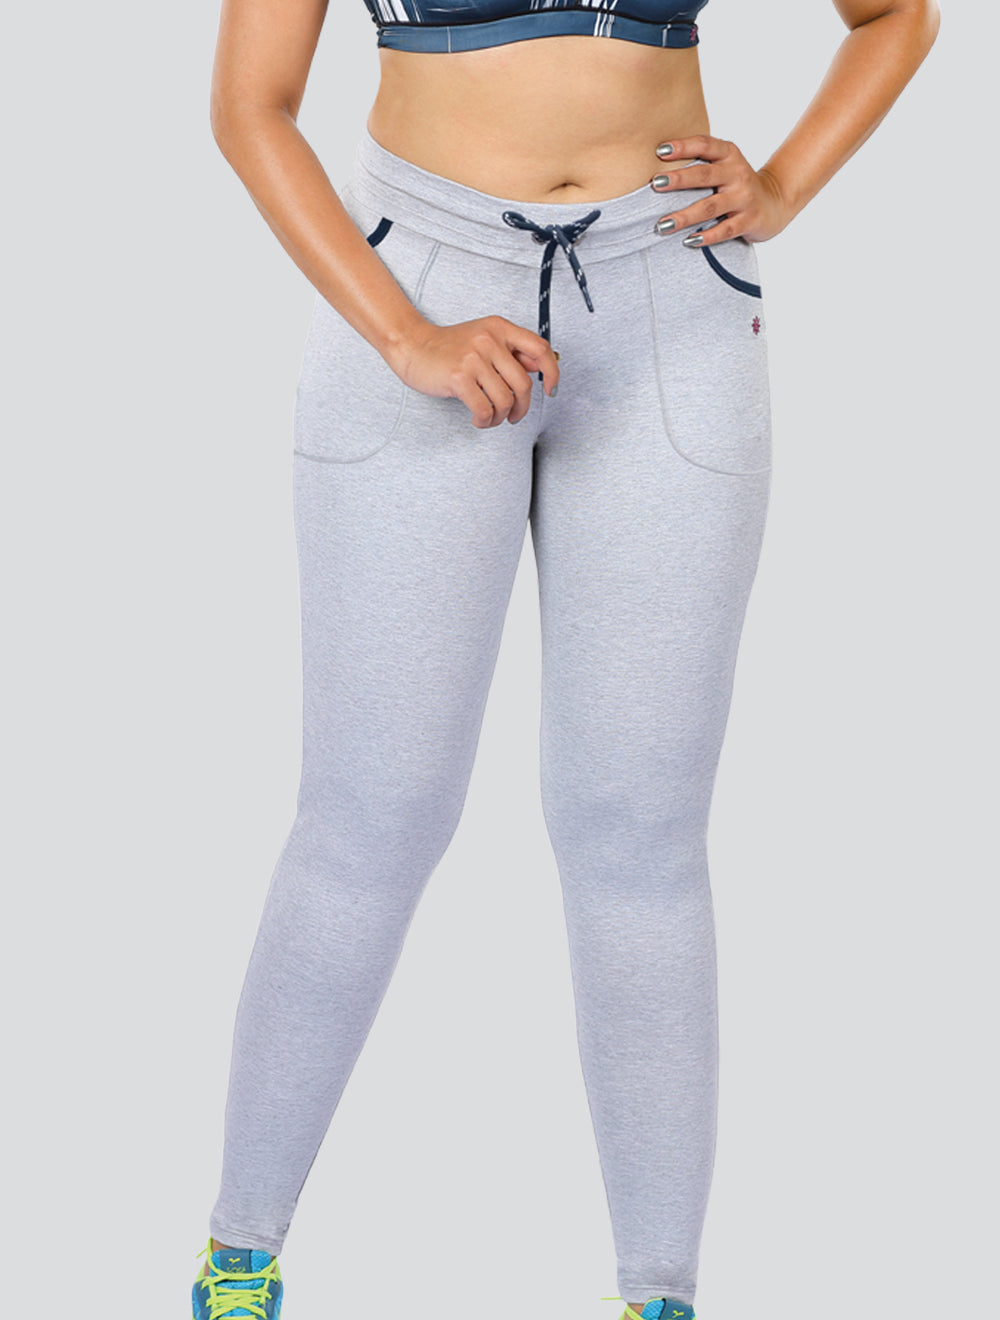 Gym wear Mesh Leggings Workout Pants with Side Pockets Yoga Track Pants for  Women & Girls at Rs 249 in Surat